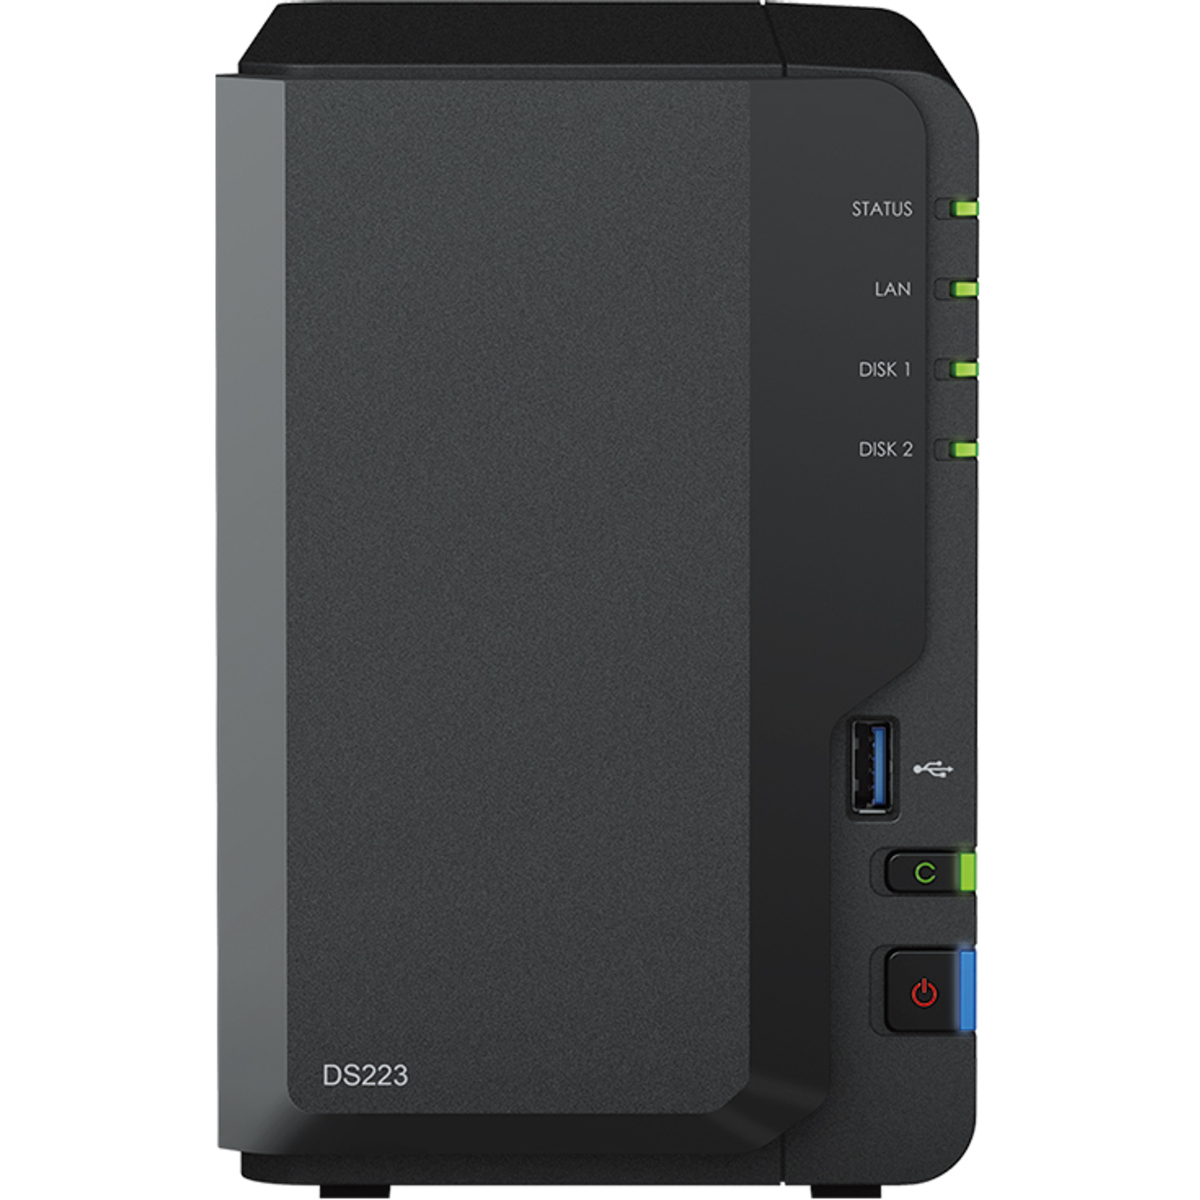 Synology DiskStation DS223 4tb 2-Bay Desktop Personal / Basic Home / Small Office NAS - Network Attached Storage Device 1x4tb Western Digital Red Pro WD4003FFBX 3.5 7200rpm SATA 6Gb/s HDD NAS Class Drives Installed - Burn-In Tested DiskStation DS223